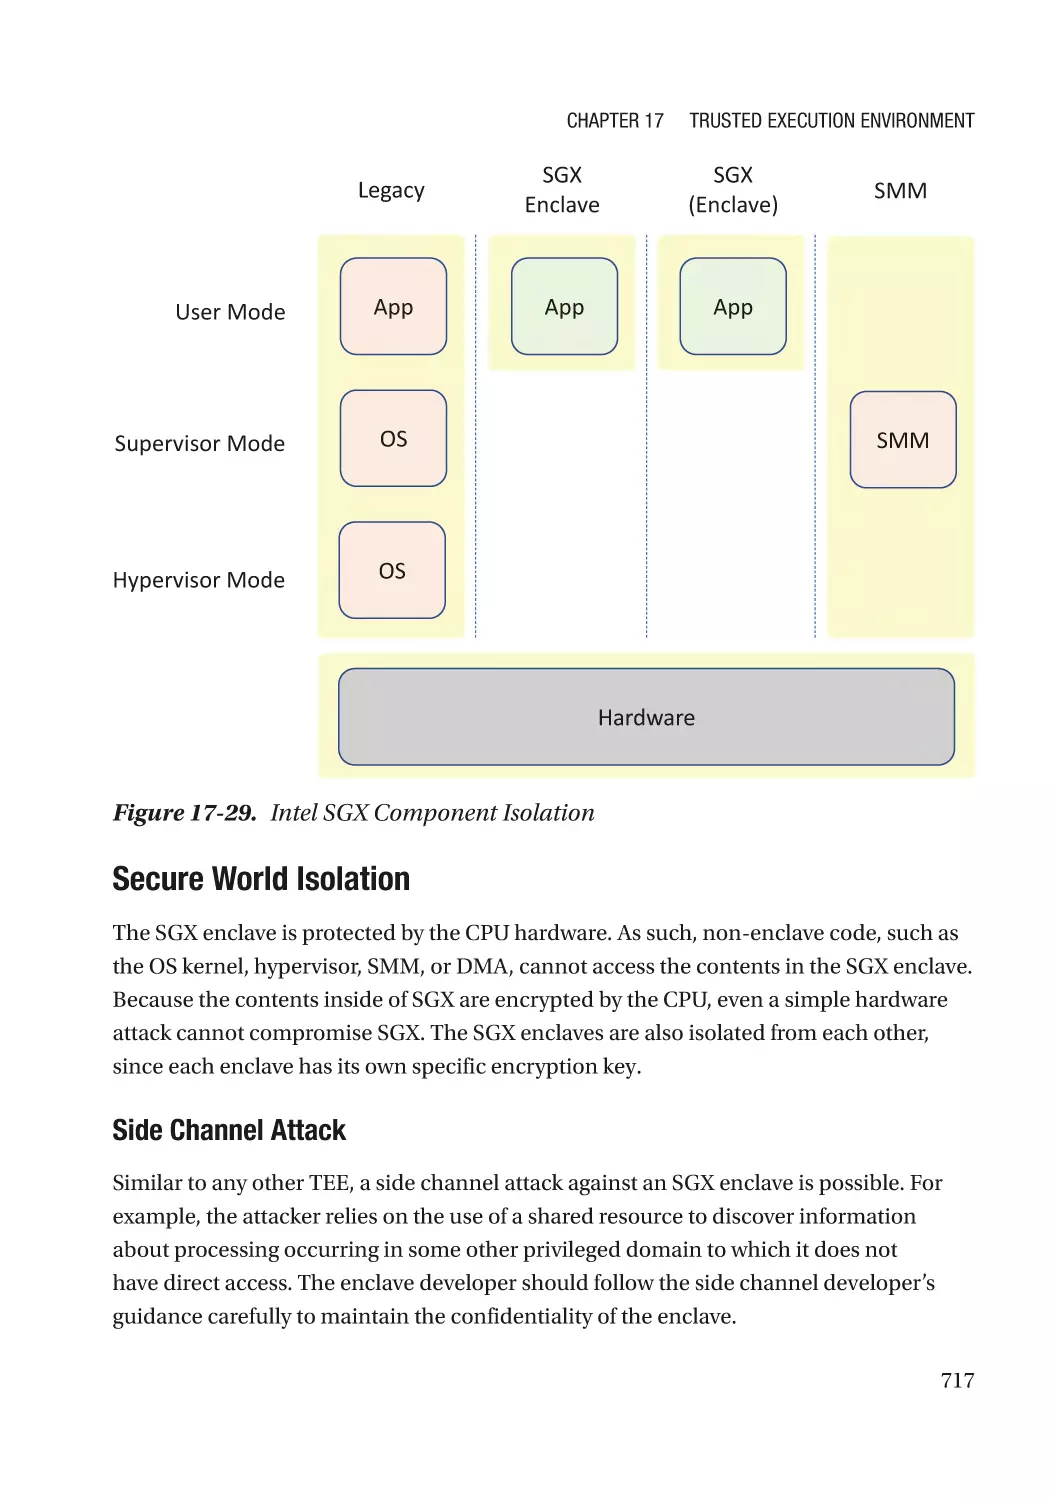 Secure World Isolation
Side Channel Attack